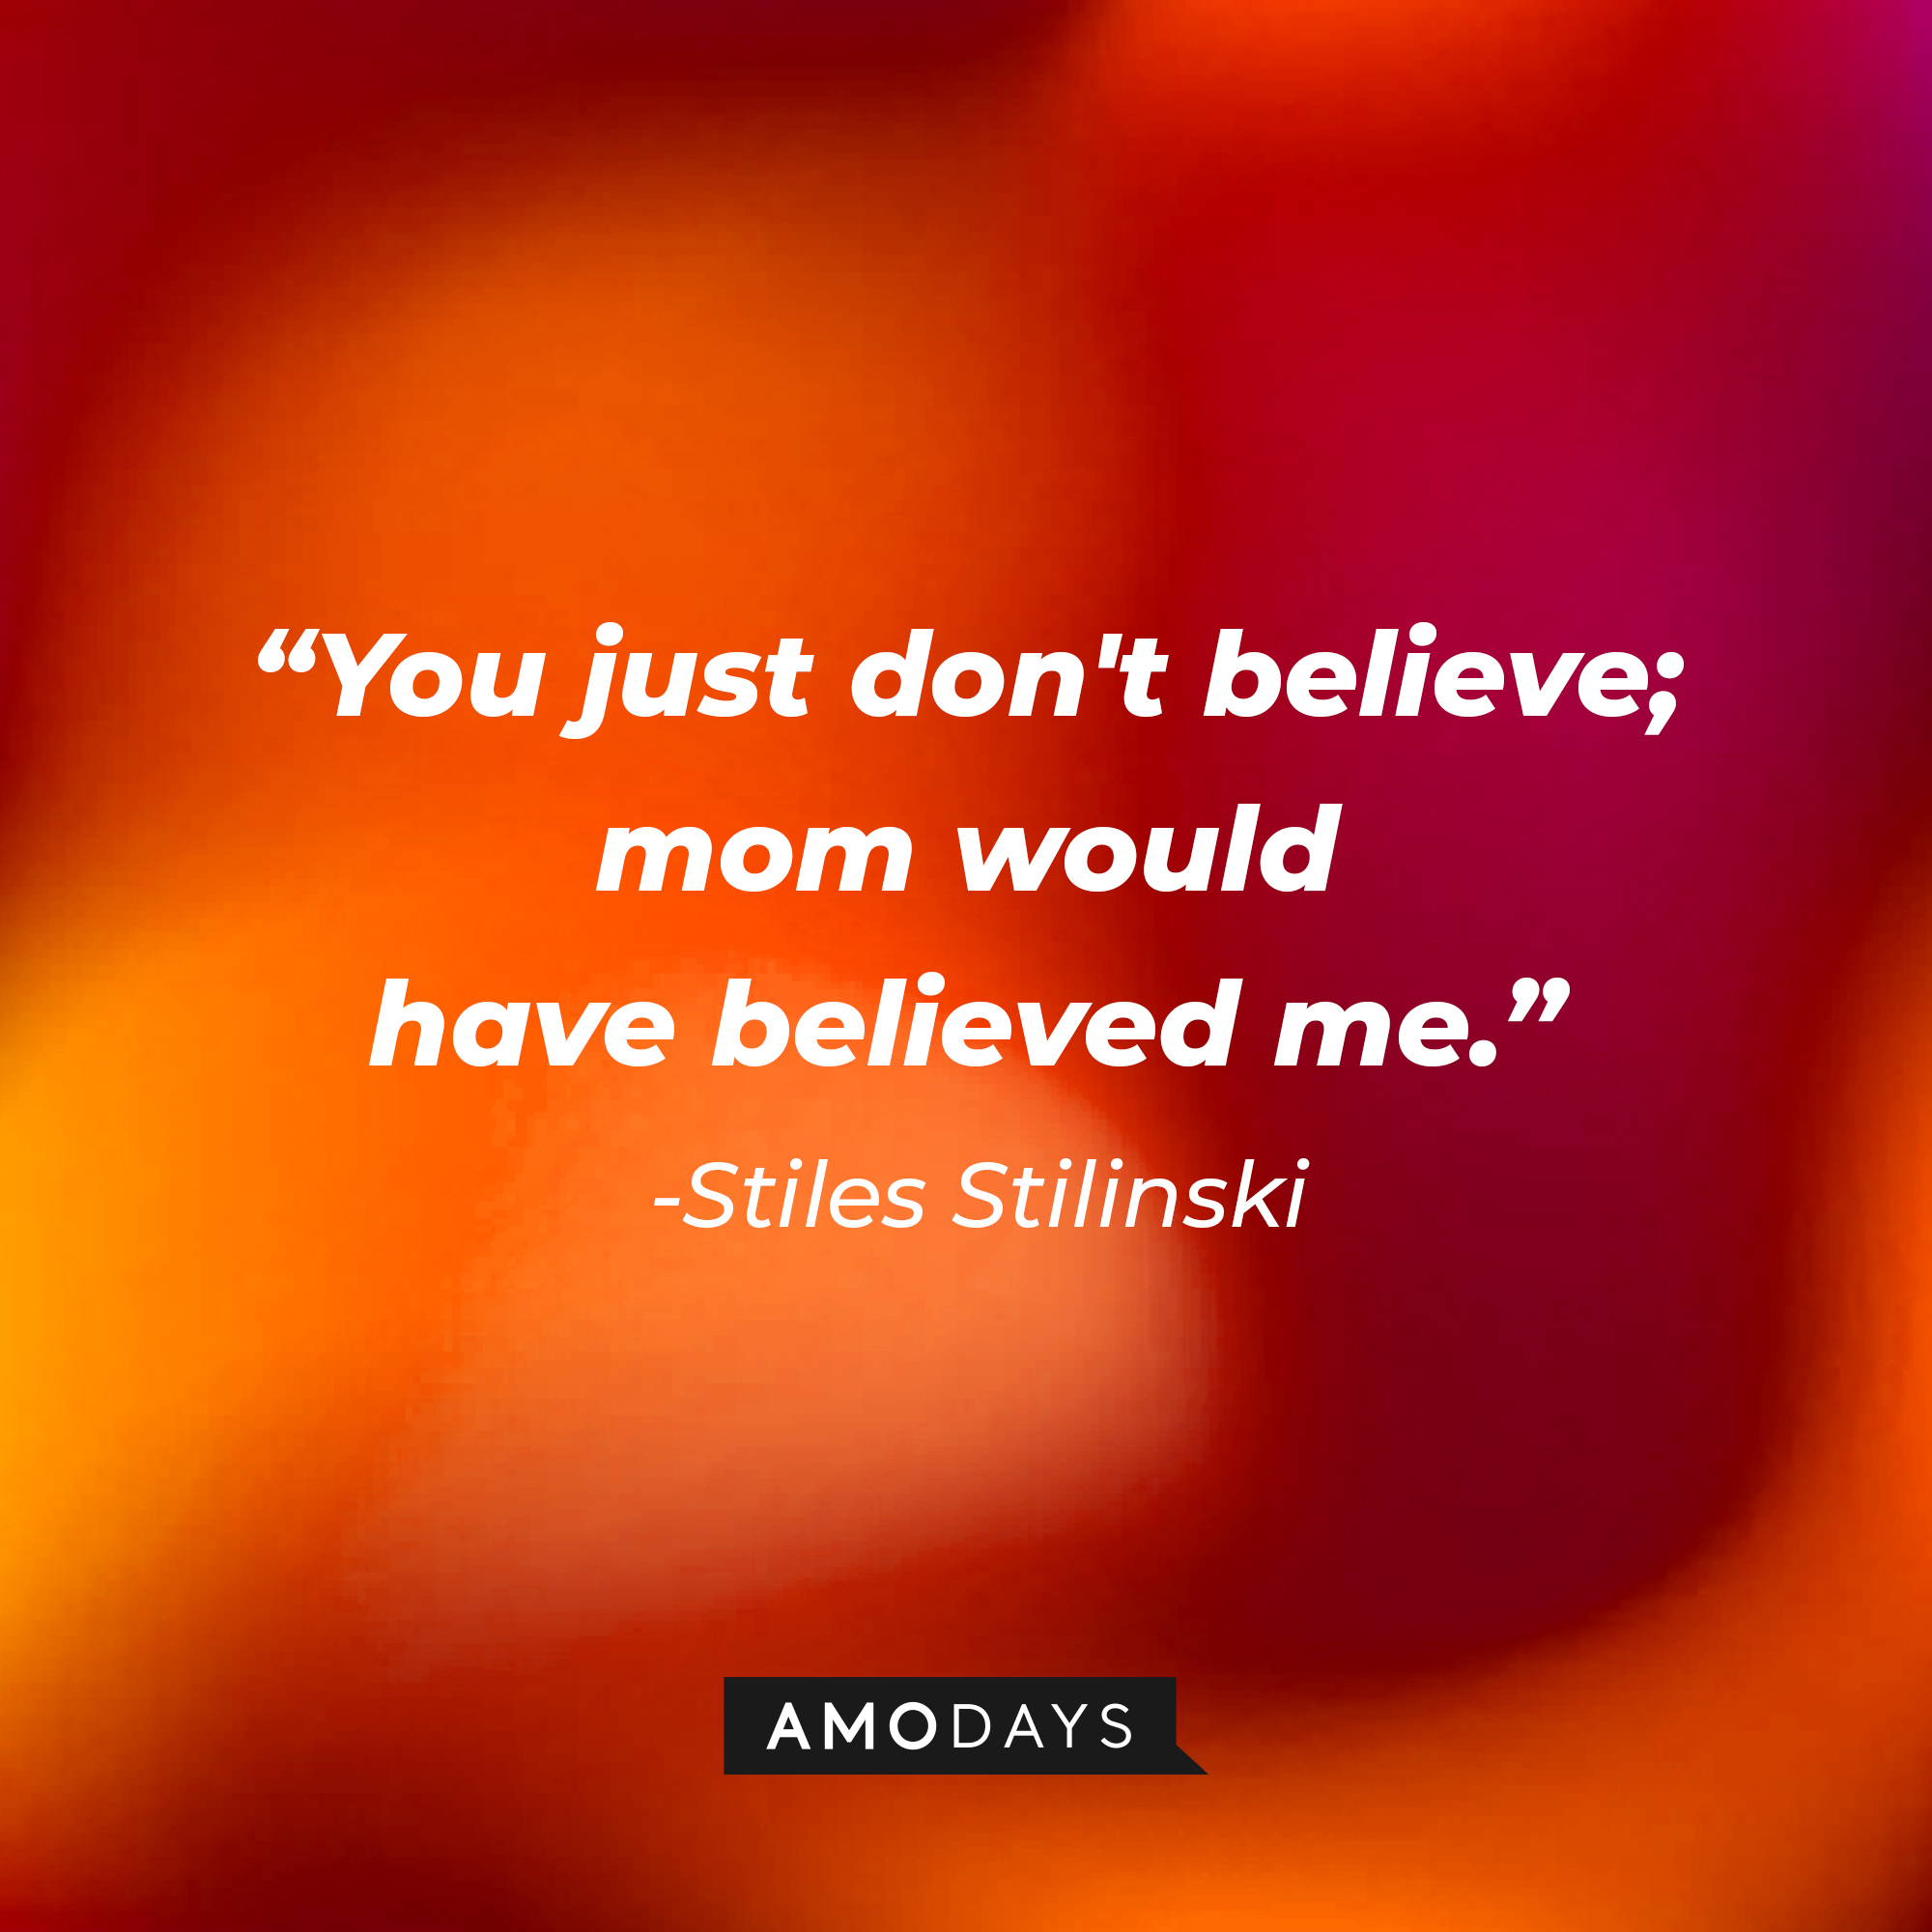 Stiles Stilinski's quote: "You just don't believe; mom would have believed me." | Image: AmoDays